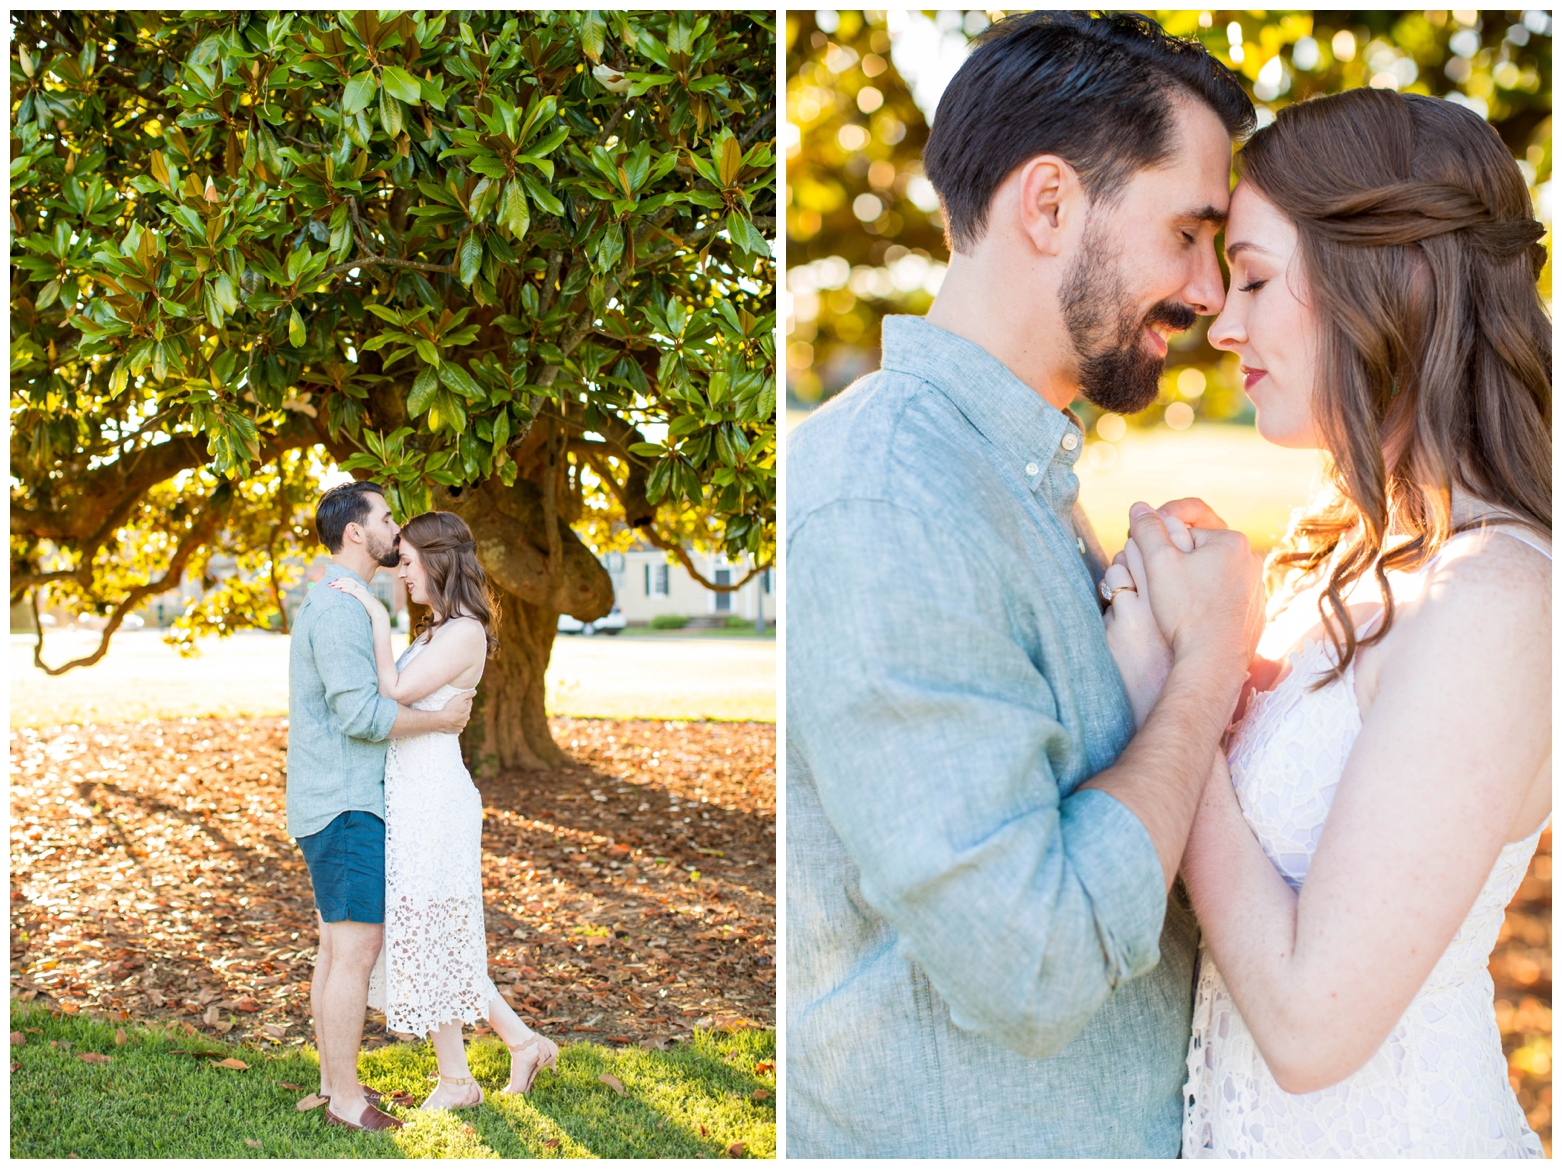 View More: http://hopetaylorphotographyphotos.pass.us/ashley-and-wythe-engagement